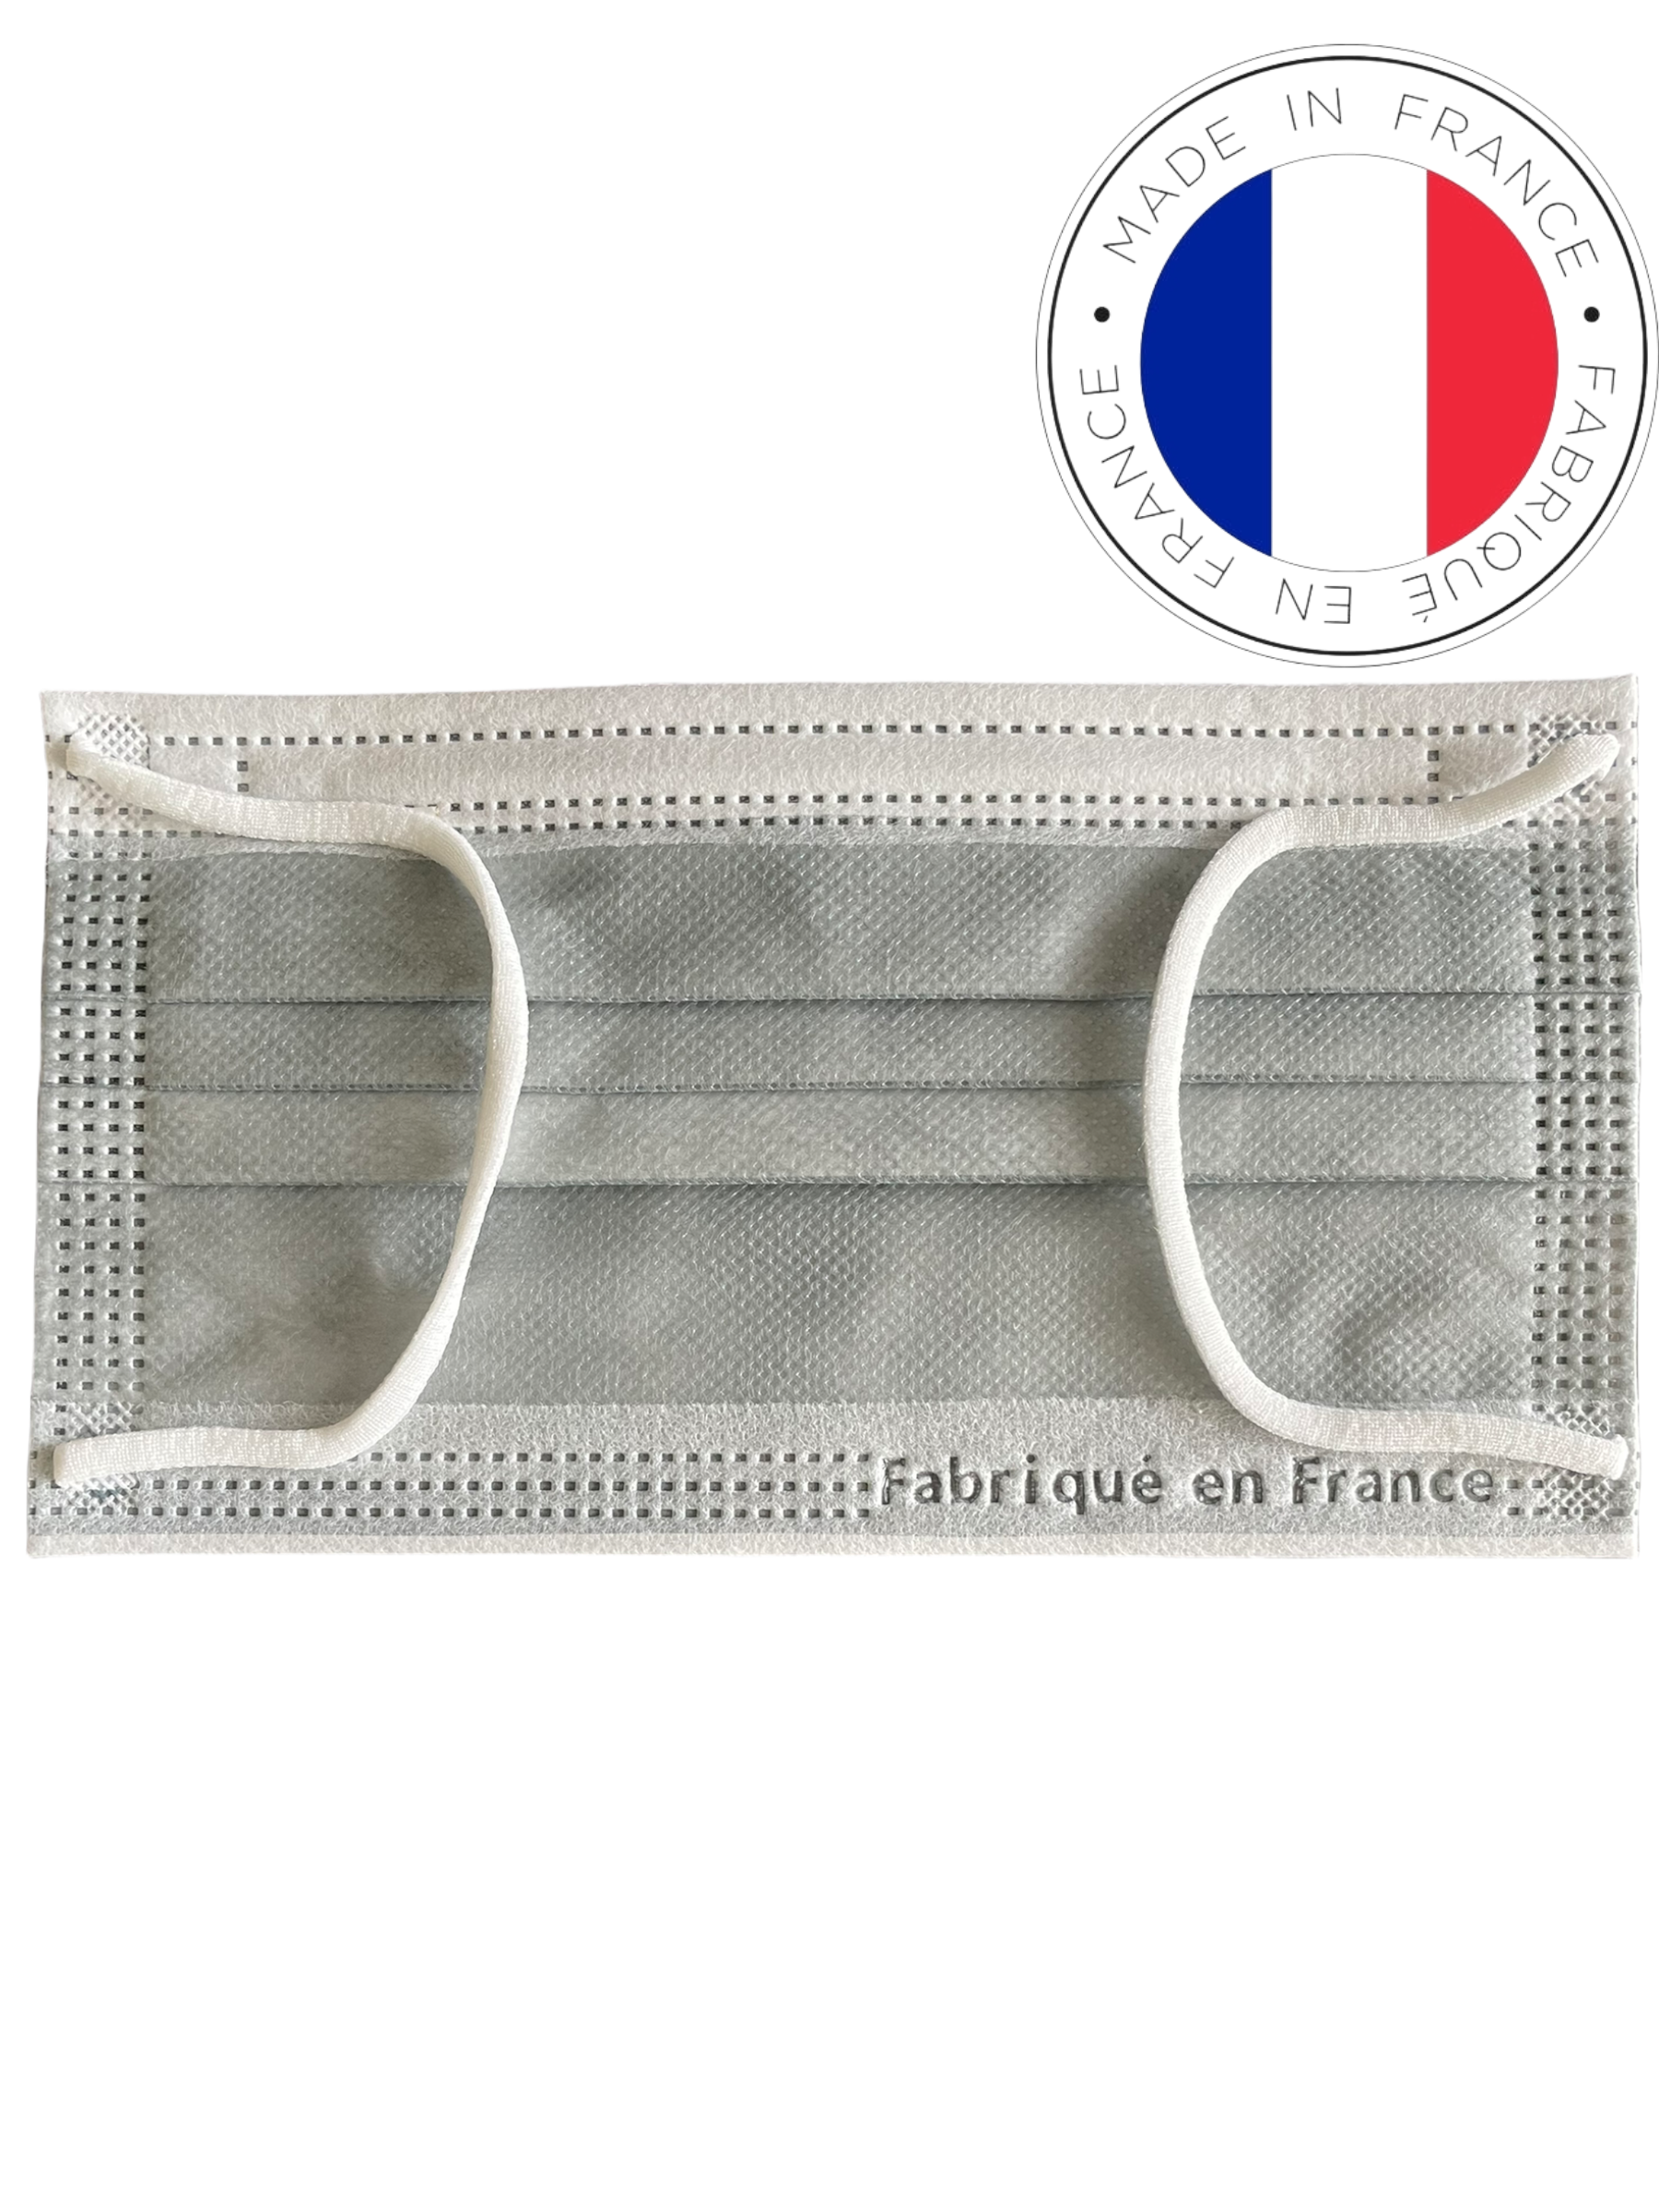 Masque Chirurgical Adulte (X50) - Gris Denim